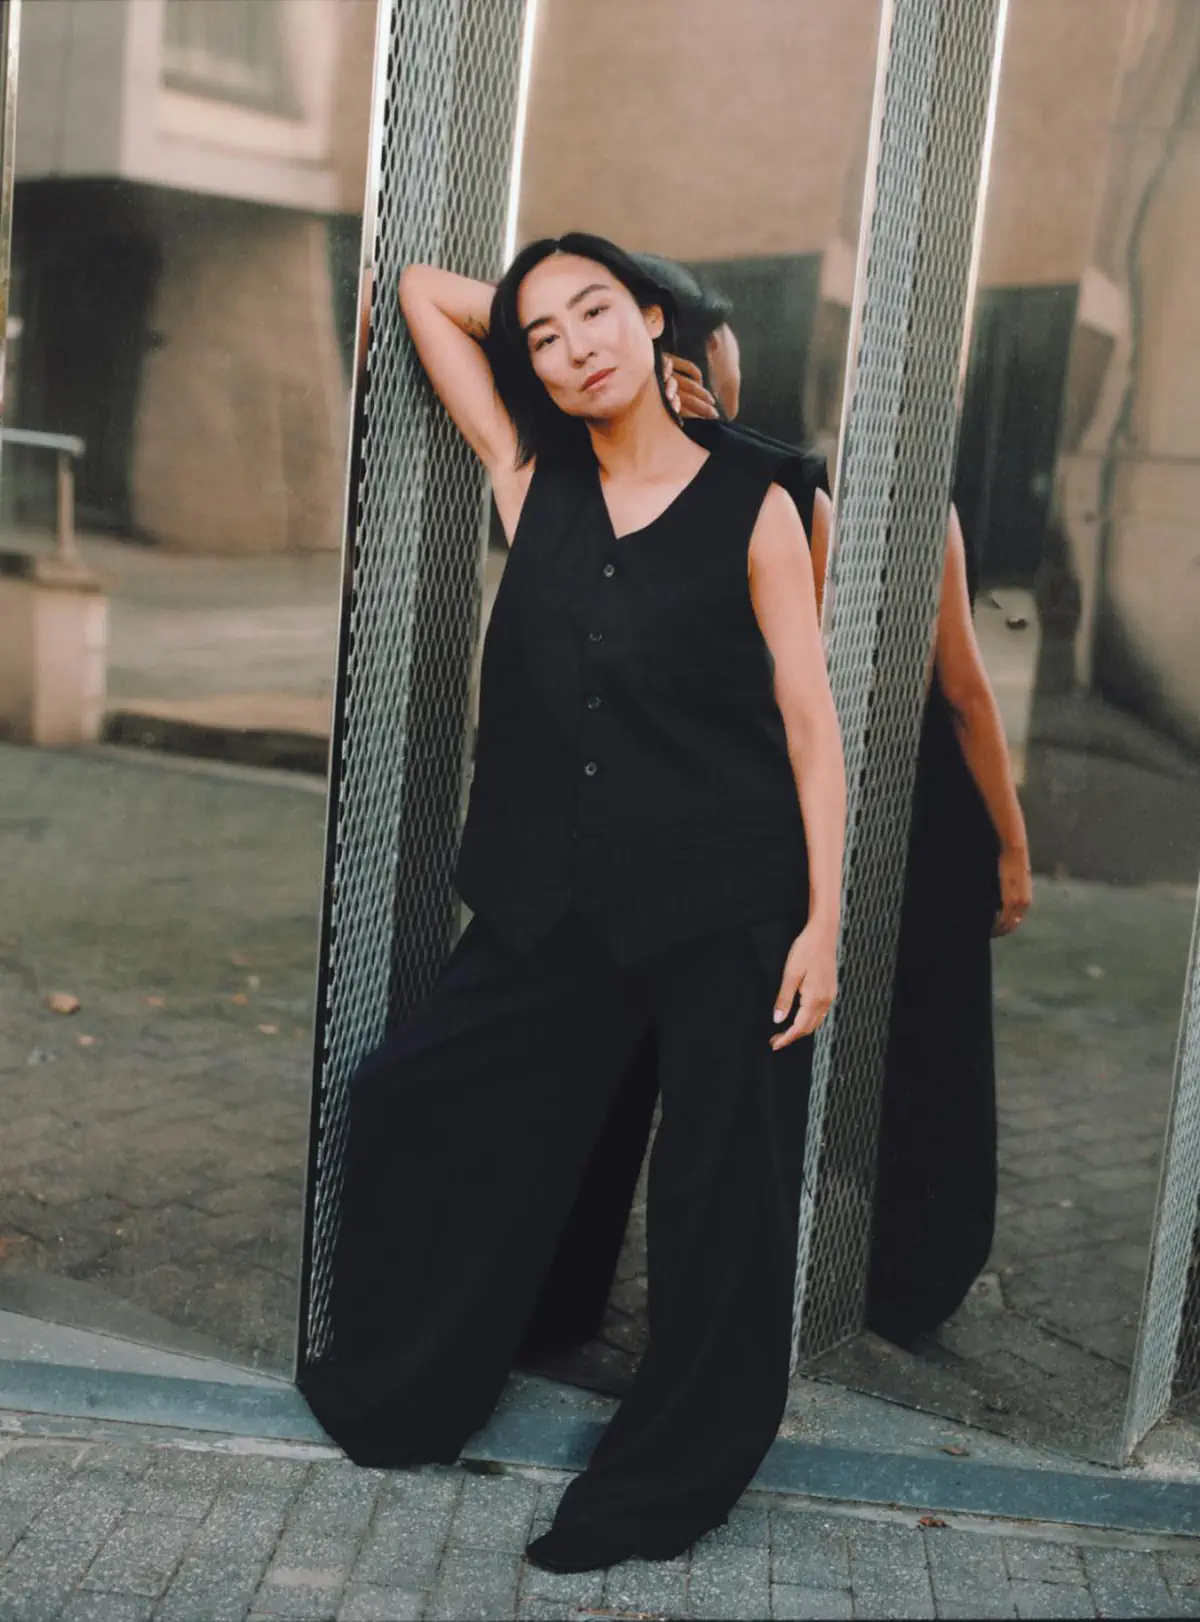 Greta Lee covers The Sunday Times Style December 10th, 2023 by James Harvey-Kelly